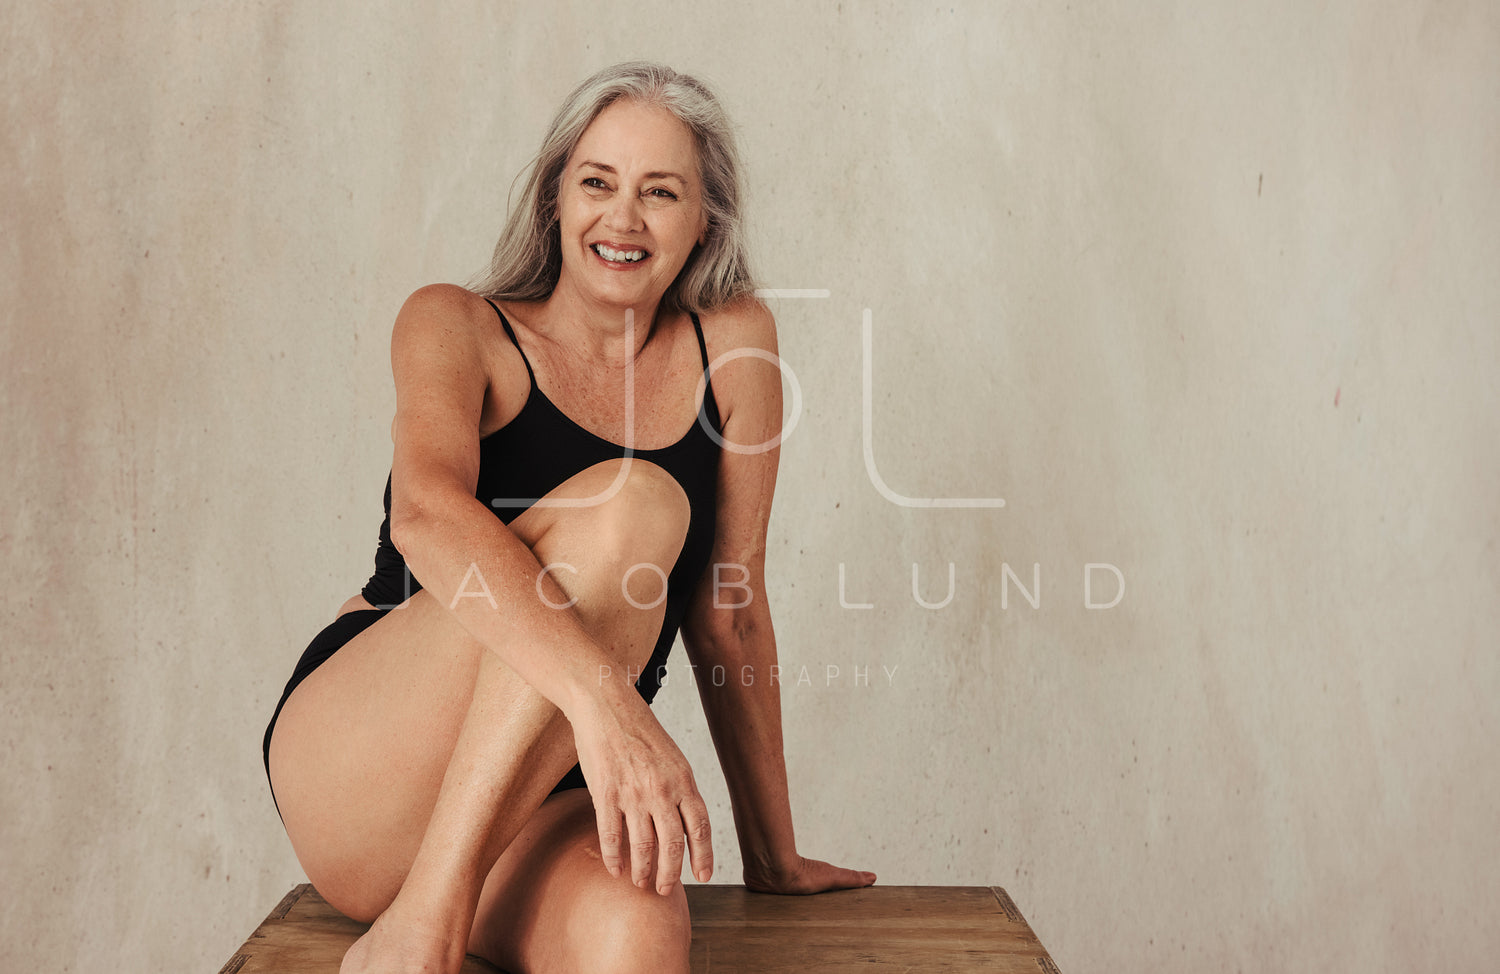 Four natural women of all ages celebrating their bodies – Jacob Lund  Photography Store- premium stock photo